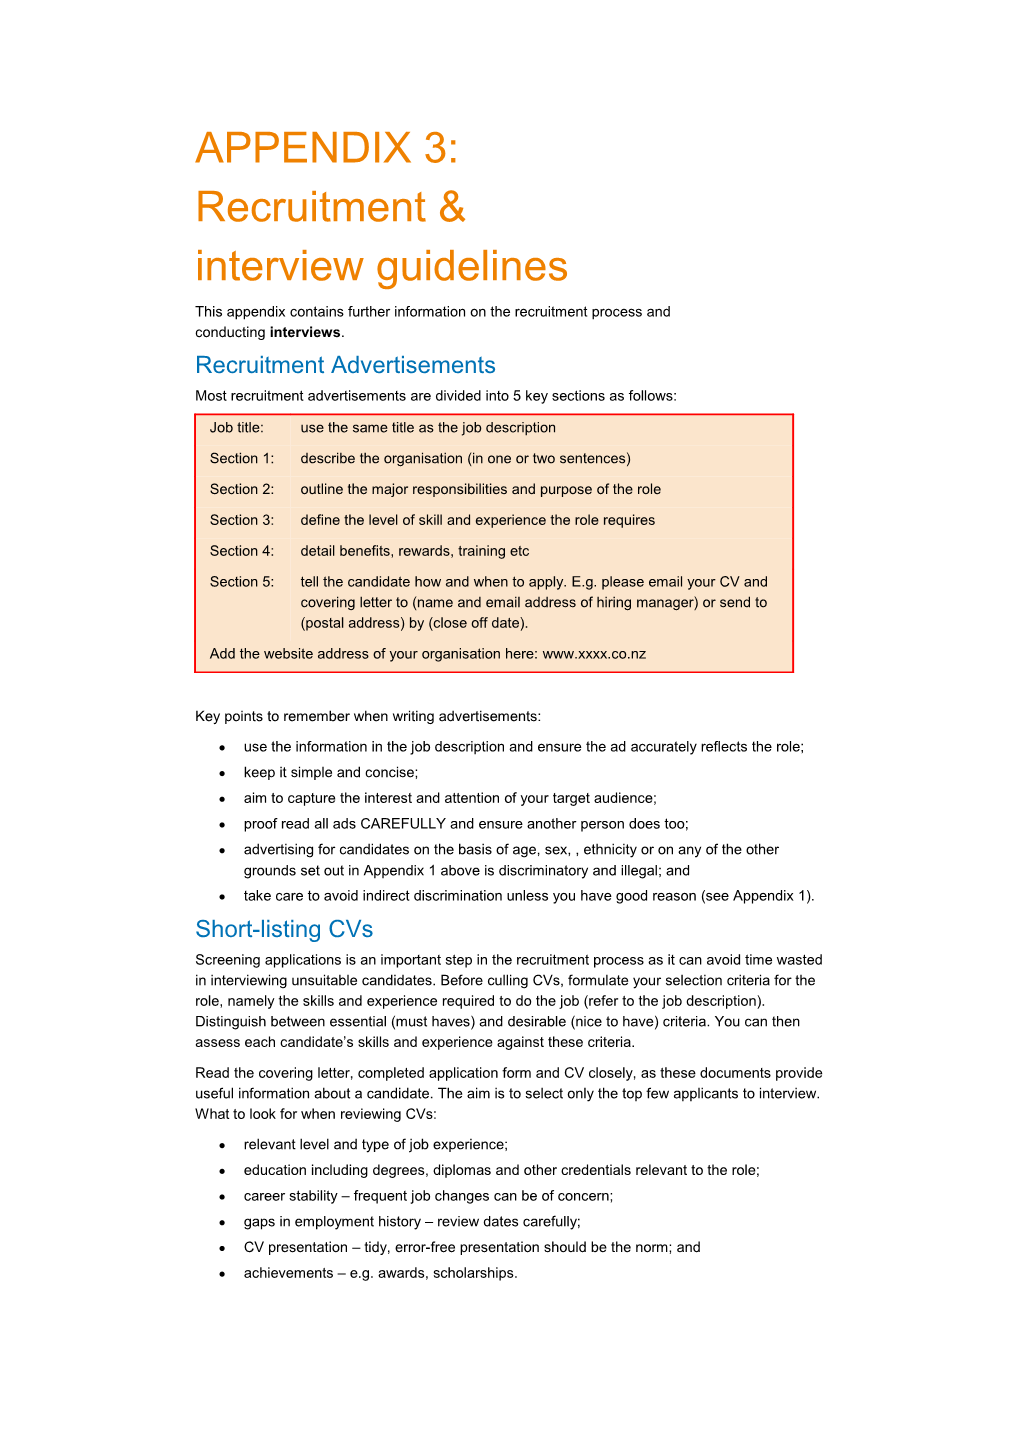 Recruitment & Interview Guidelines